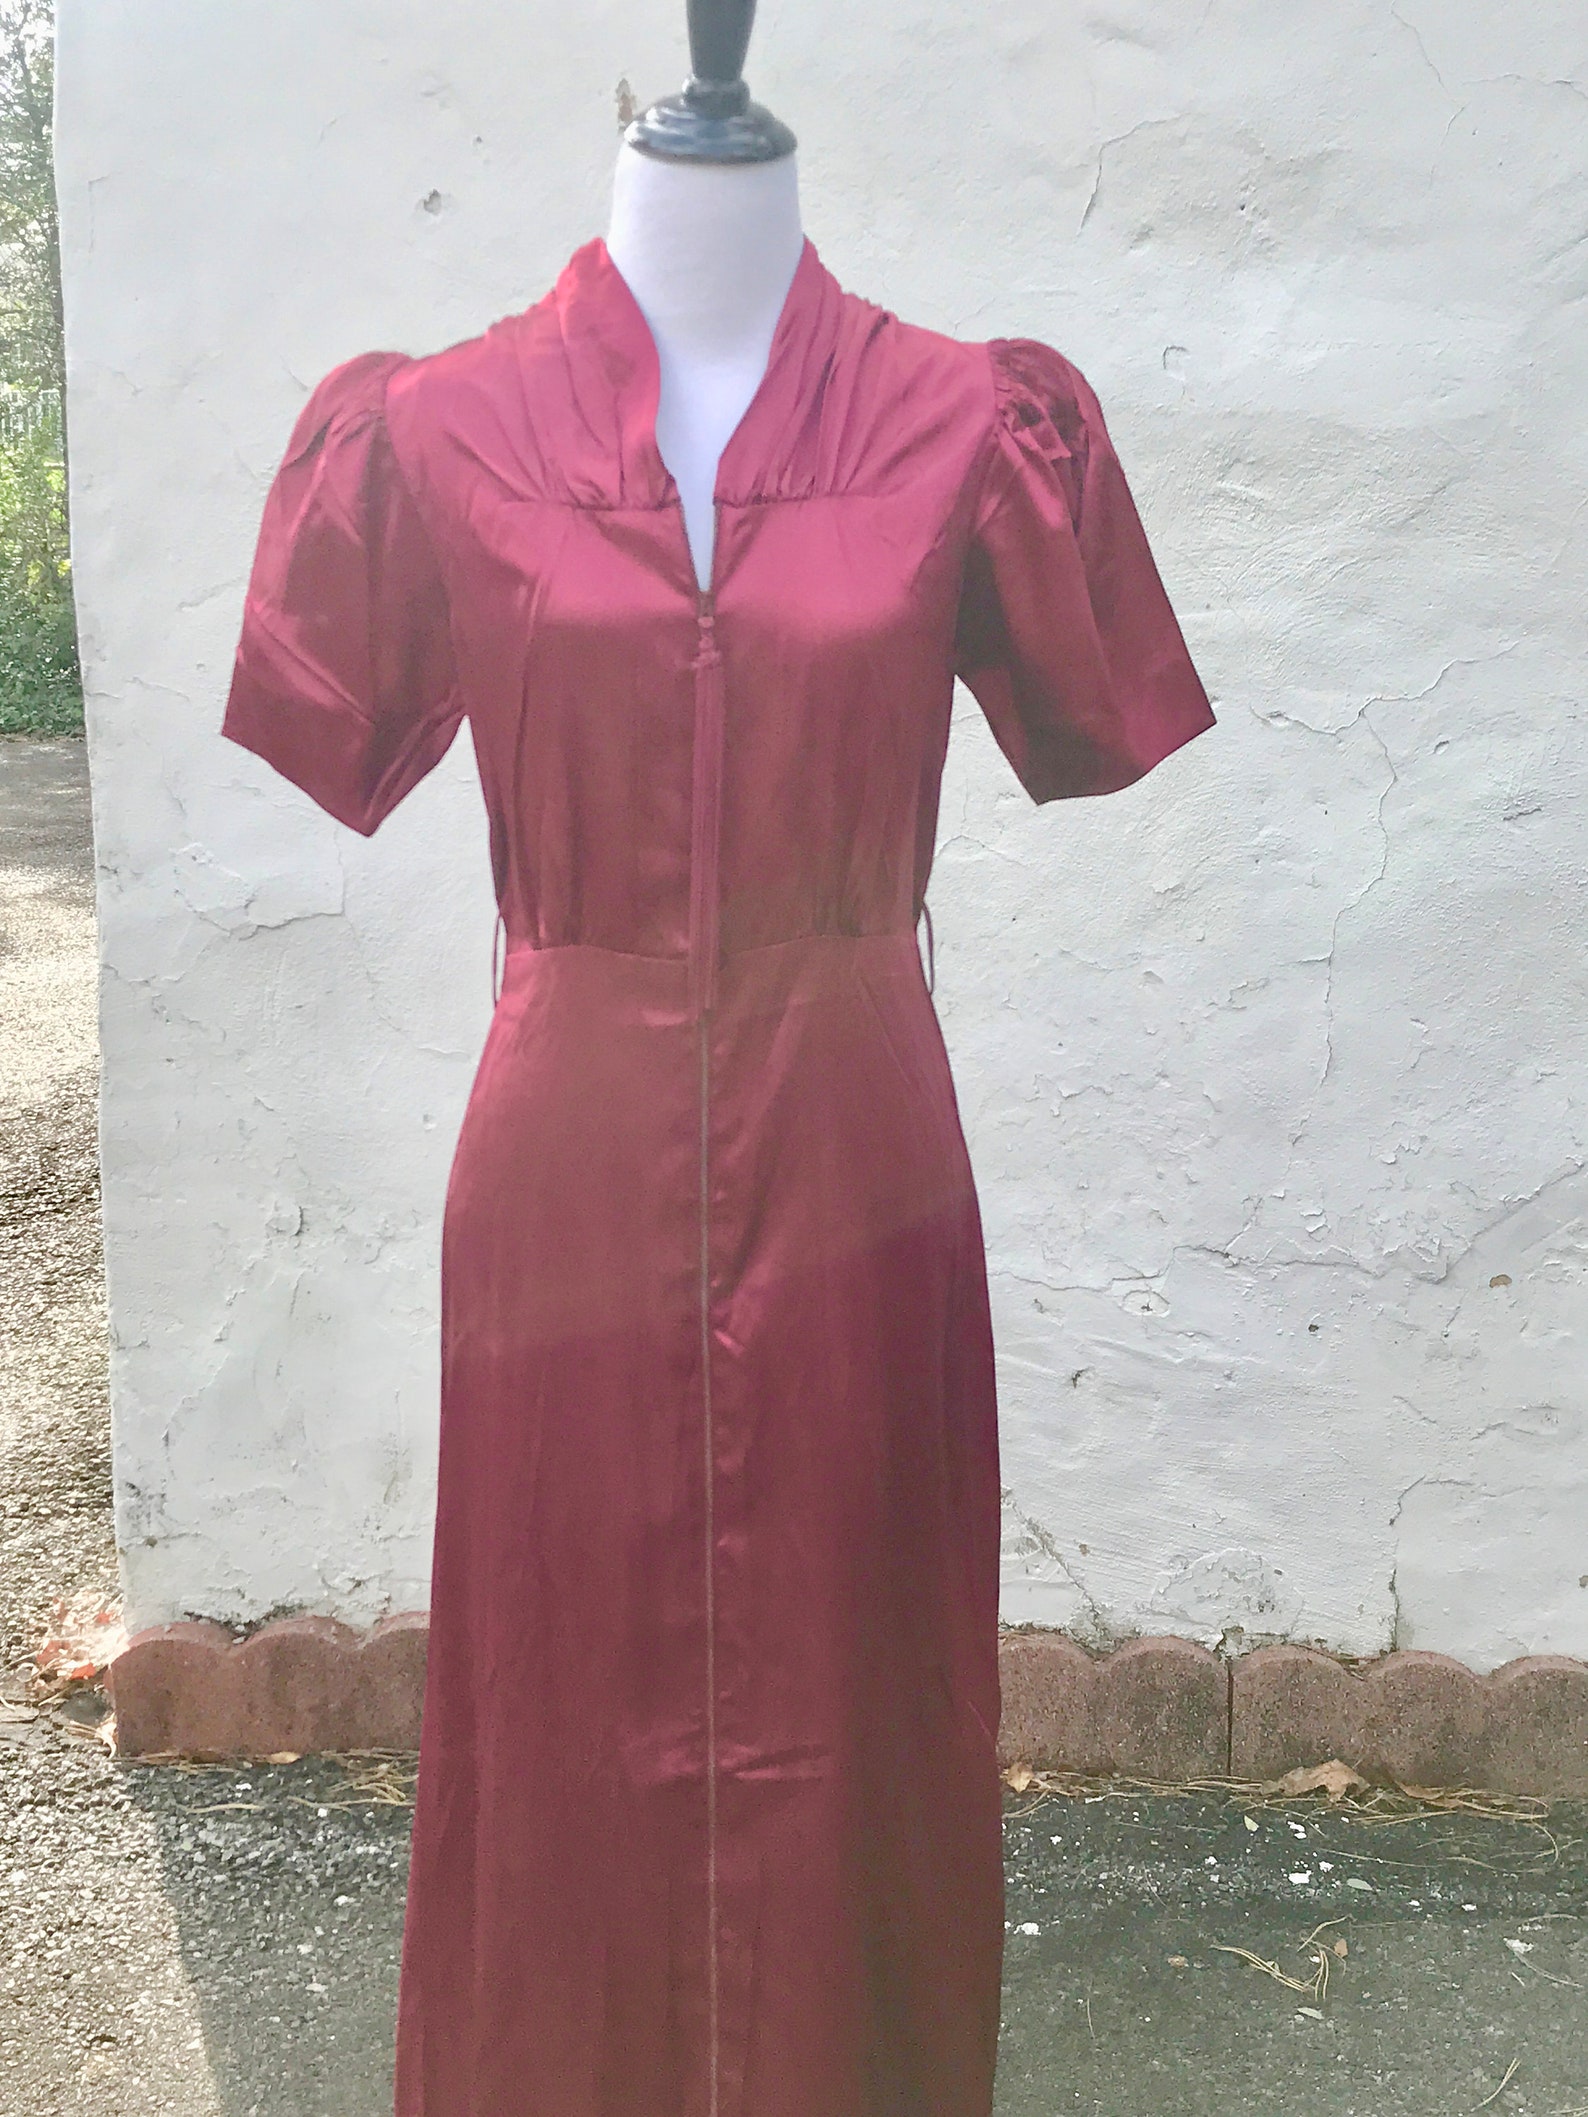 Vintage 1940s Red Wind Liquid Satin Caftan robe hostess gown | Etsy